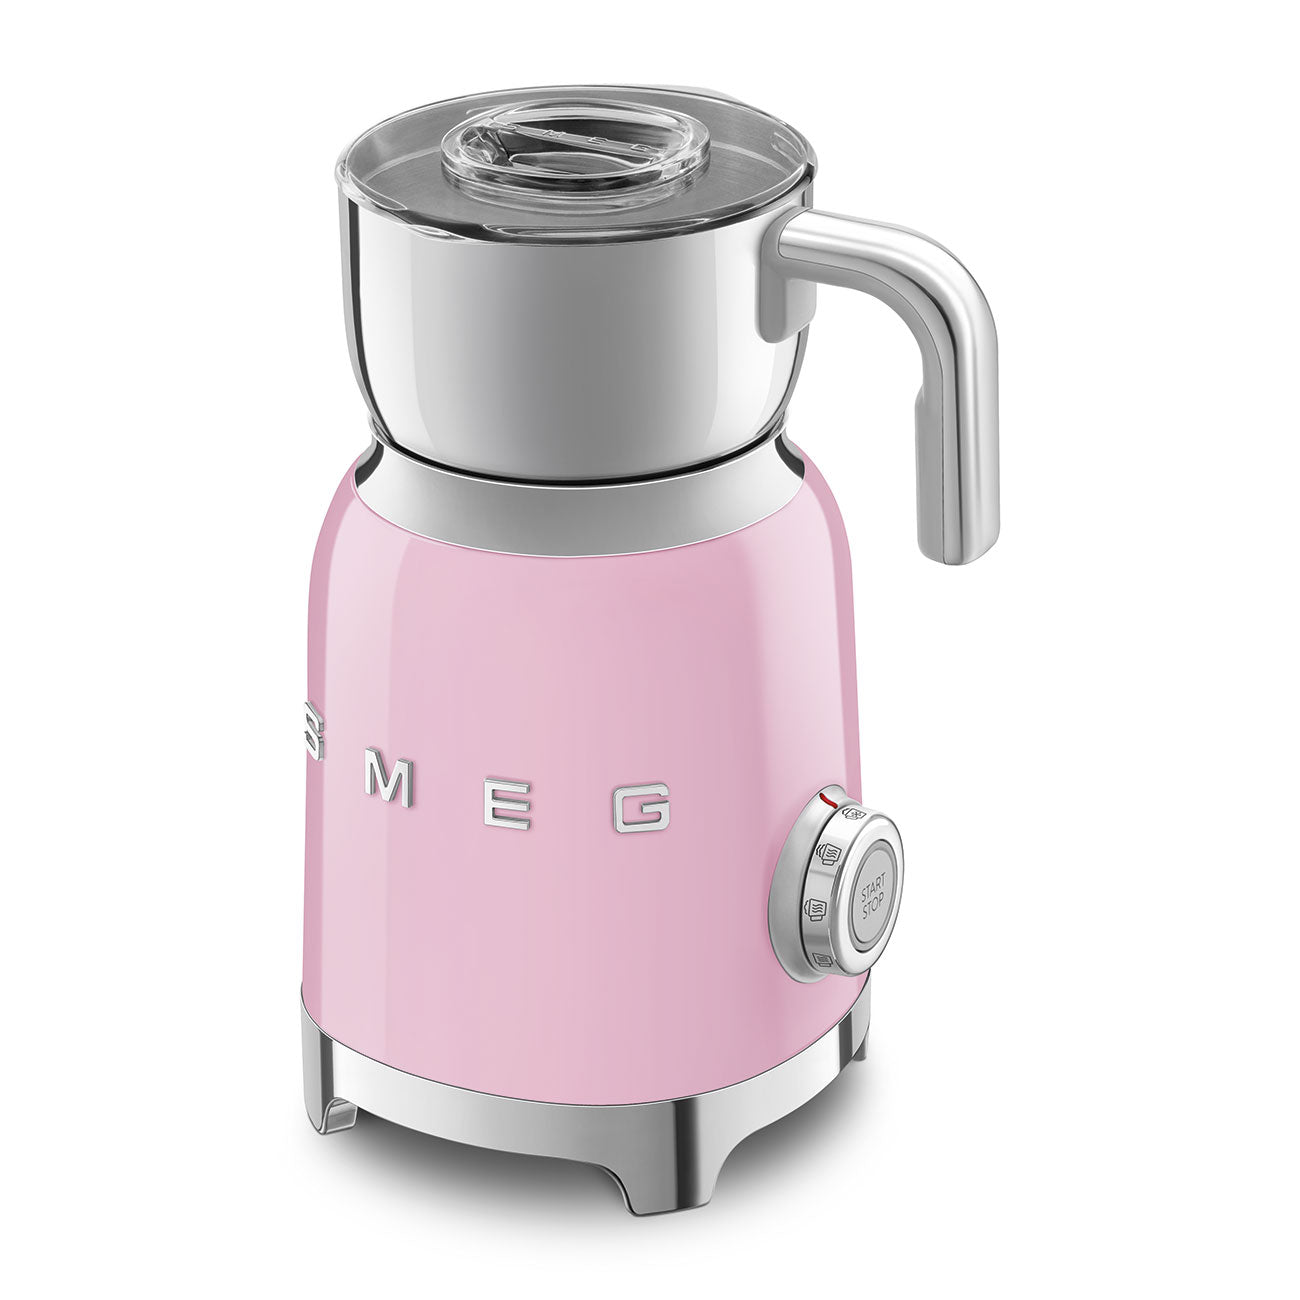 Smeg multifunction milk frother